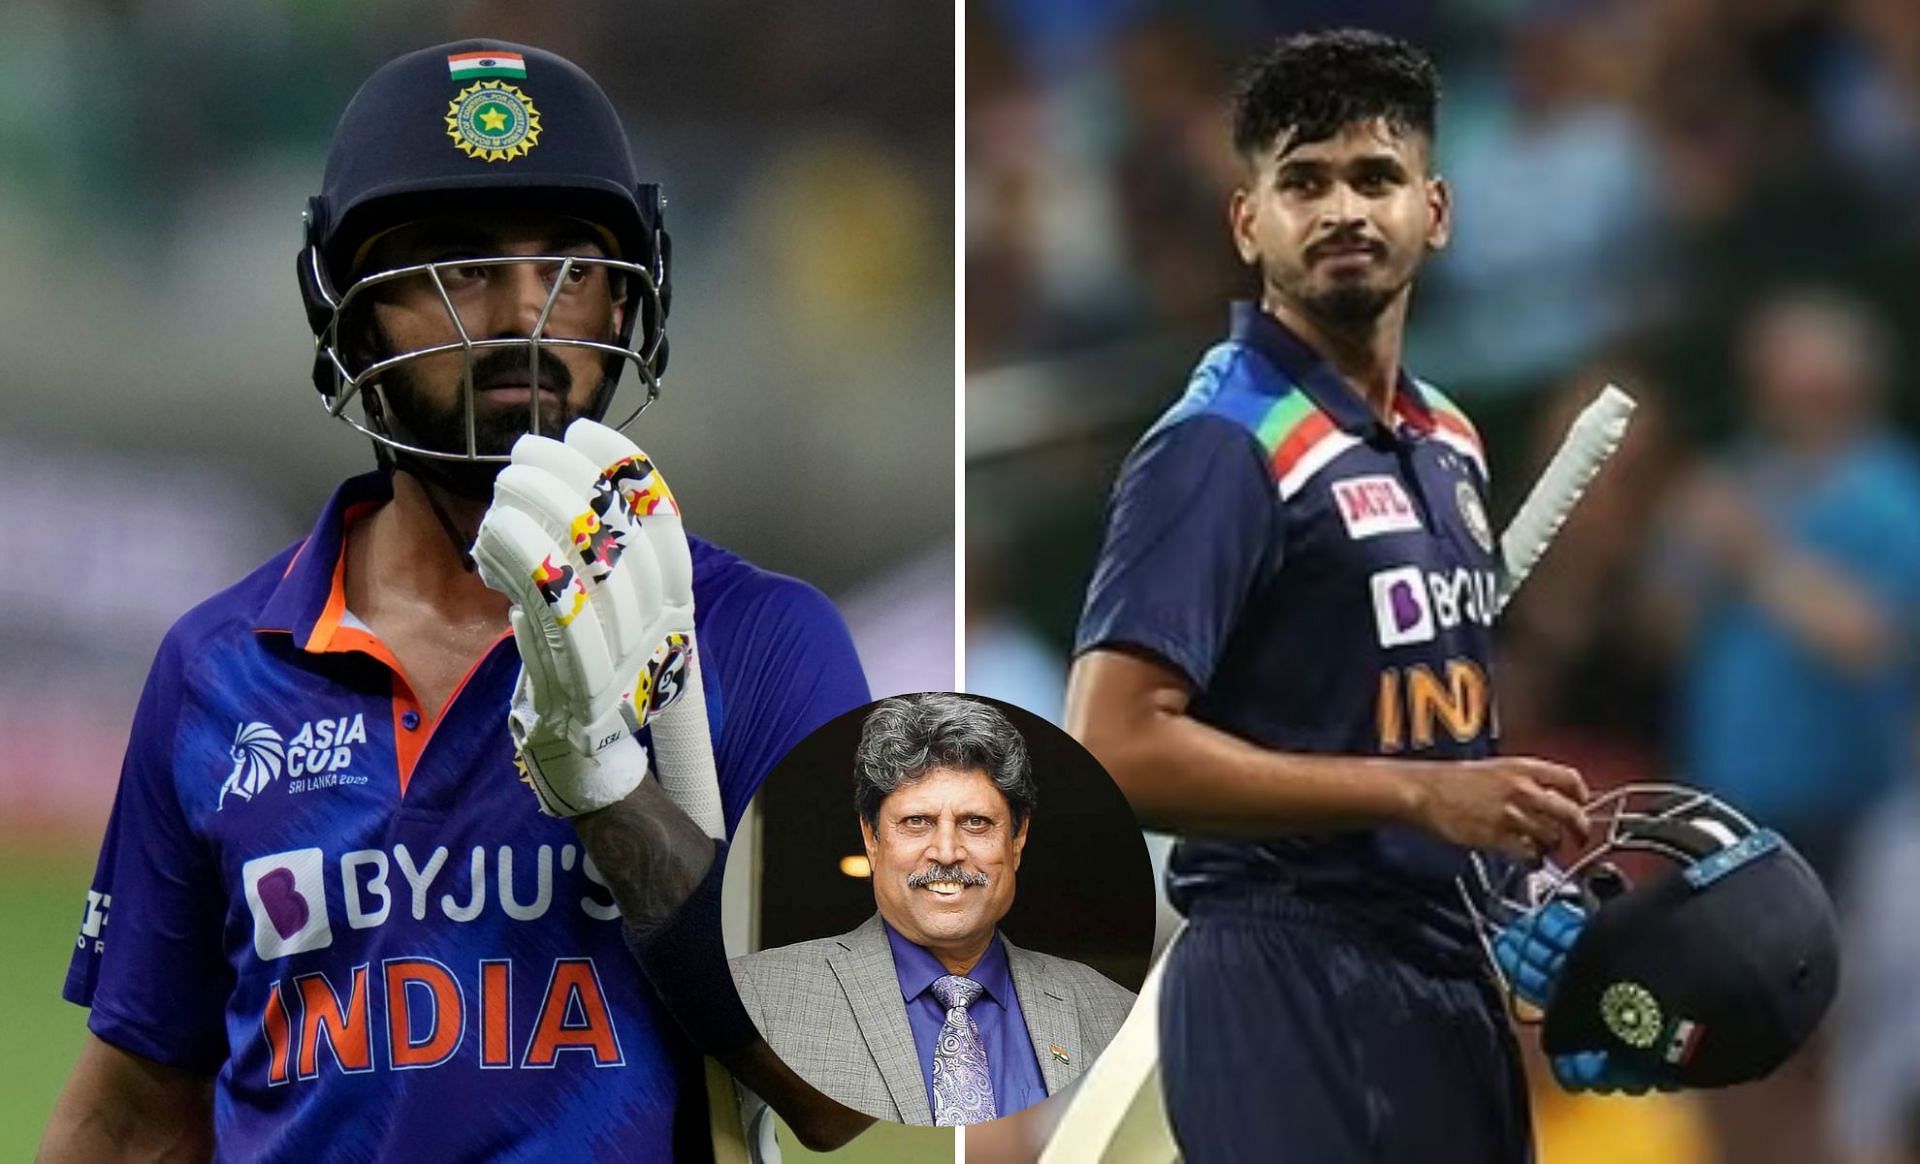 Who said what - top 3 expert reactions to Shreyas Iyer and KL Rahul's return to India's Asia Cup 2023 squad ft. Kapil Dev